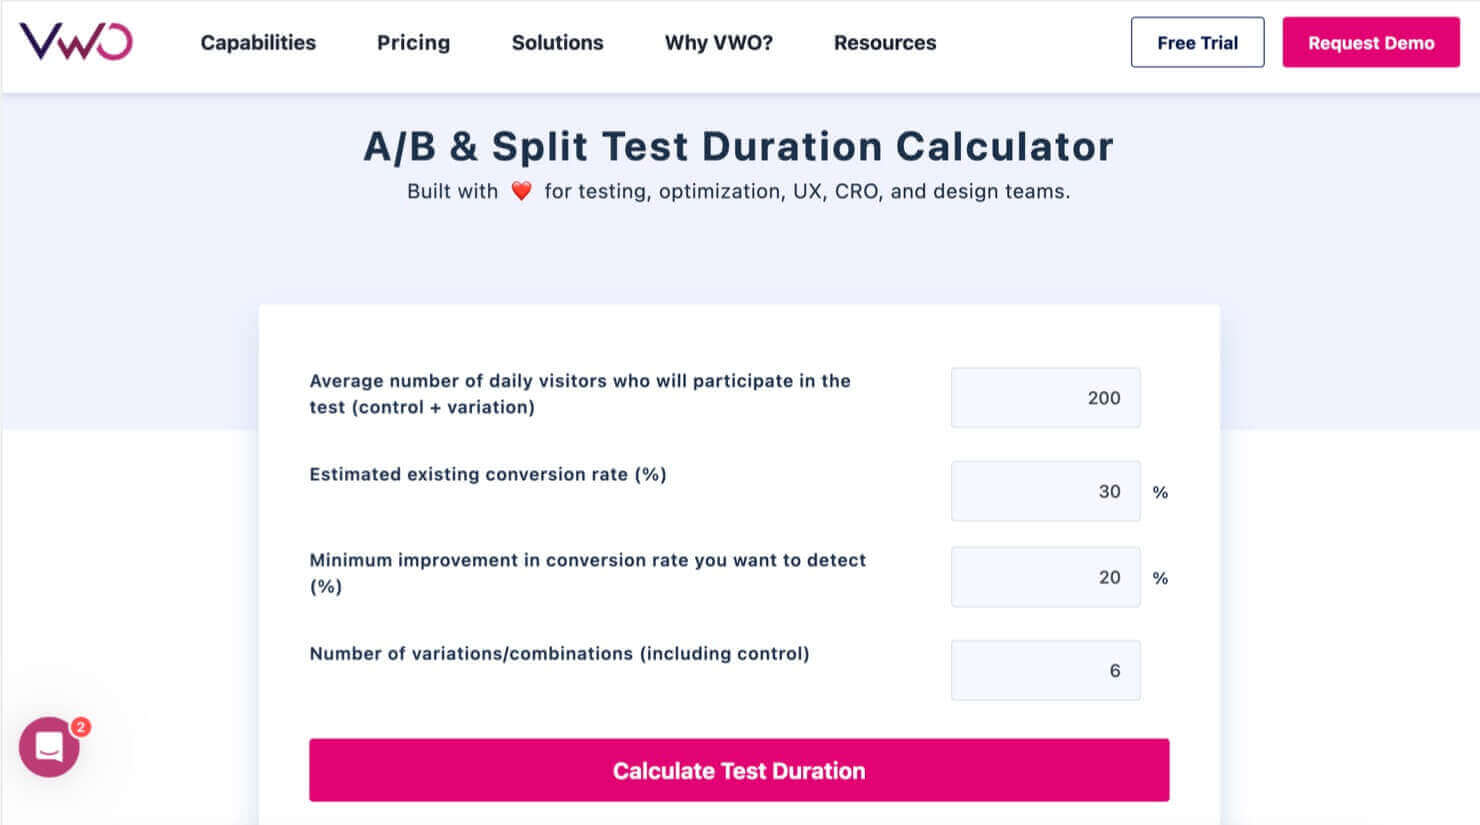 VWO's A/B & Split Test Duration Calculator. It asked for this information: Average number of daily visitors who will participate in the test (control + variation), Estimated existing conversion rate (%), Minimum improvement in conversion rate you want to detect (%), and Number of variations/combinations (including control). The CTA button says "Calculate Test Duration"